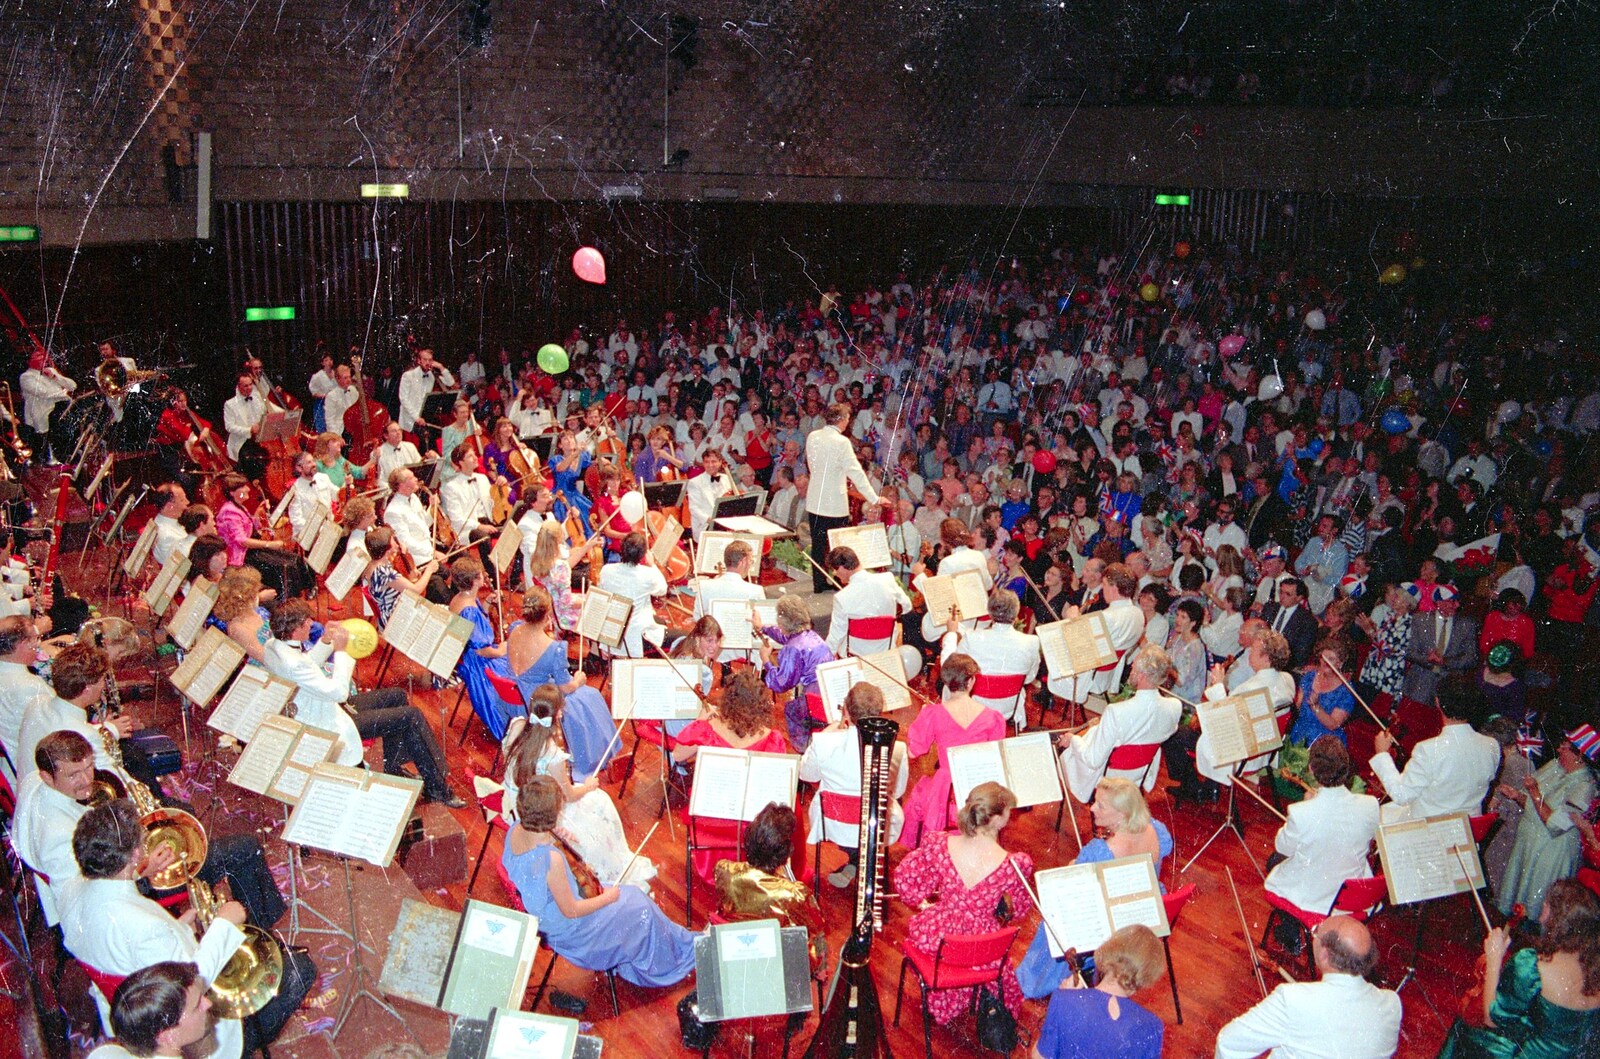 The BSO does a 'last night' from A Trip to Bracken Way, Walkford, Dorset - 8th September 1987